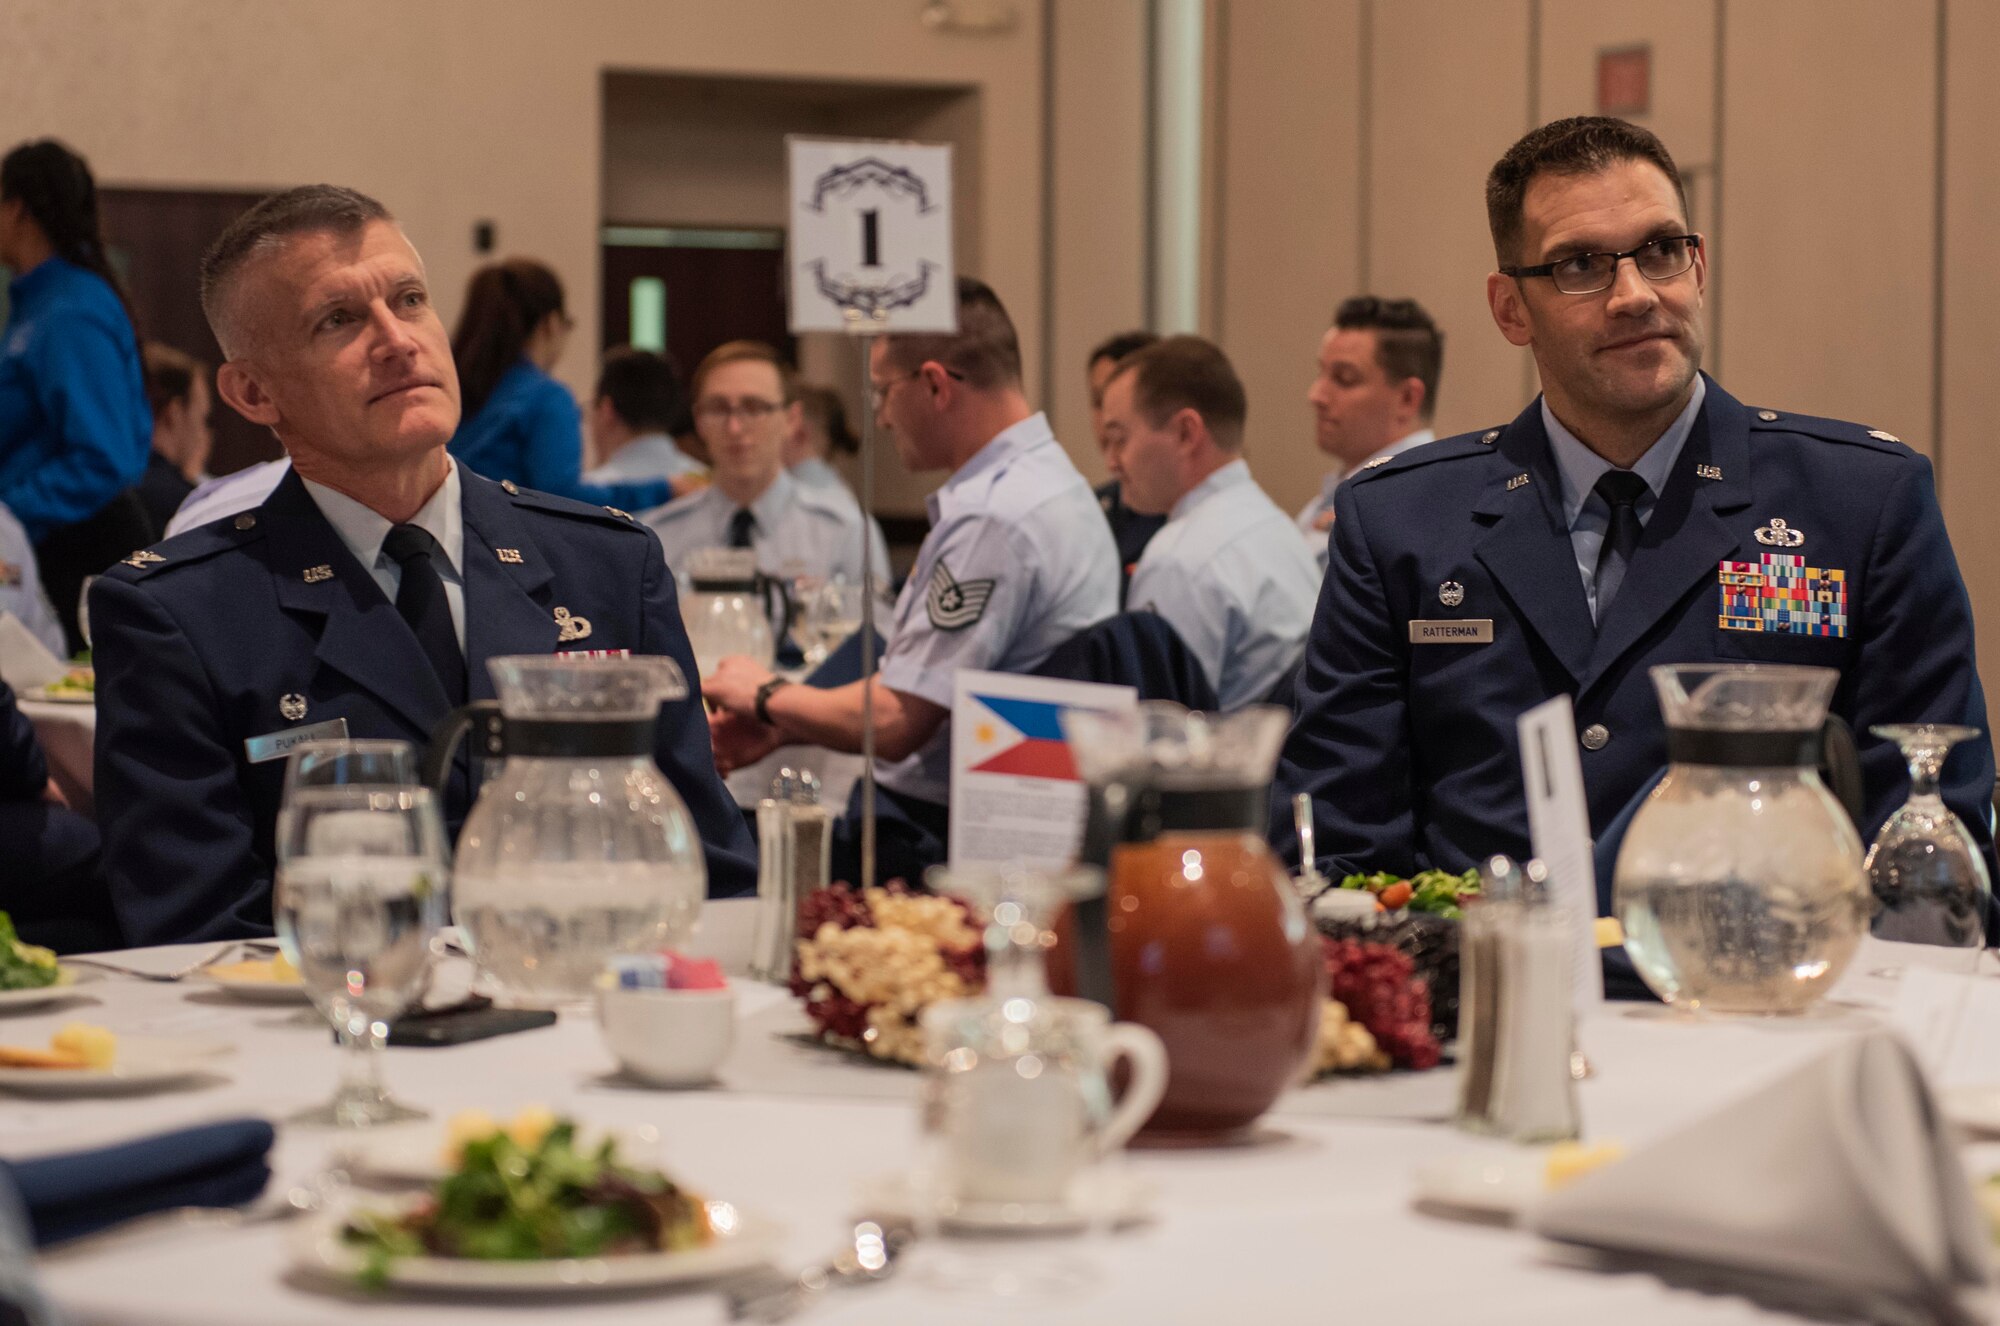 U.S. Air Force Col. Brian Pukall, 577th Weather Wing commander, and Lt. Col. Lance Ratterman, 15th Operational Weather Squad commander, listen to a guest speaker during the 15th OWS 20th anniversary dinner, Feb. 12, 2019, at Scott Air Force Base, Ill. During its 77 years, the 15th OWS has been located in six states and four countries across three different continents. It has spent the last 20 years assigned to Scott. (U.S. Air Force photo by Senior Airman Daniel Garcia)